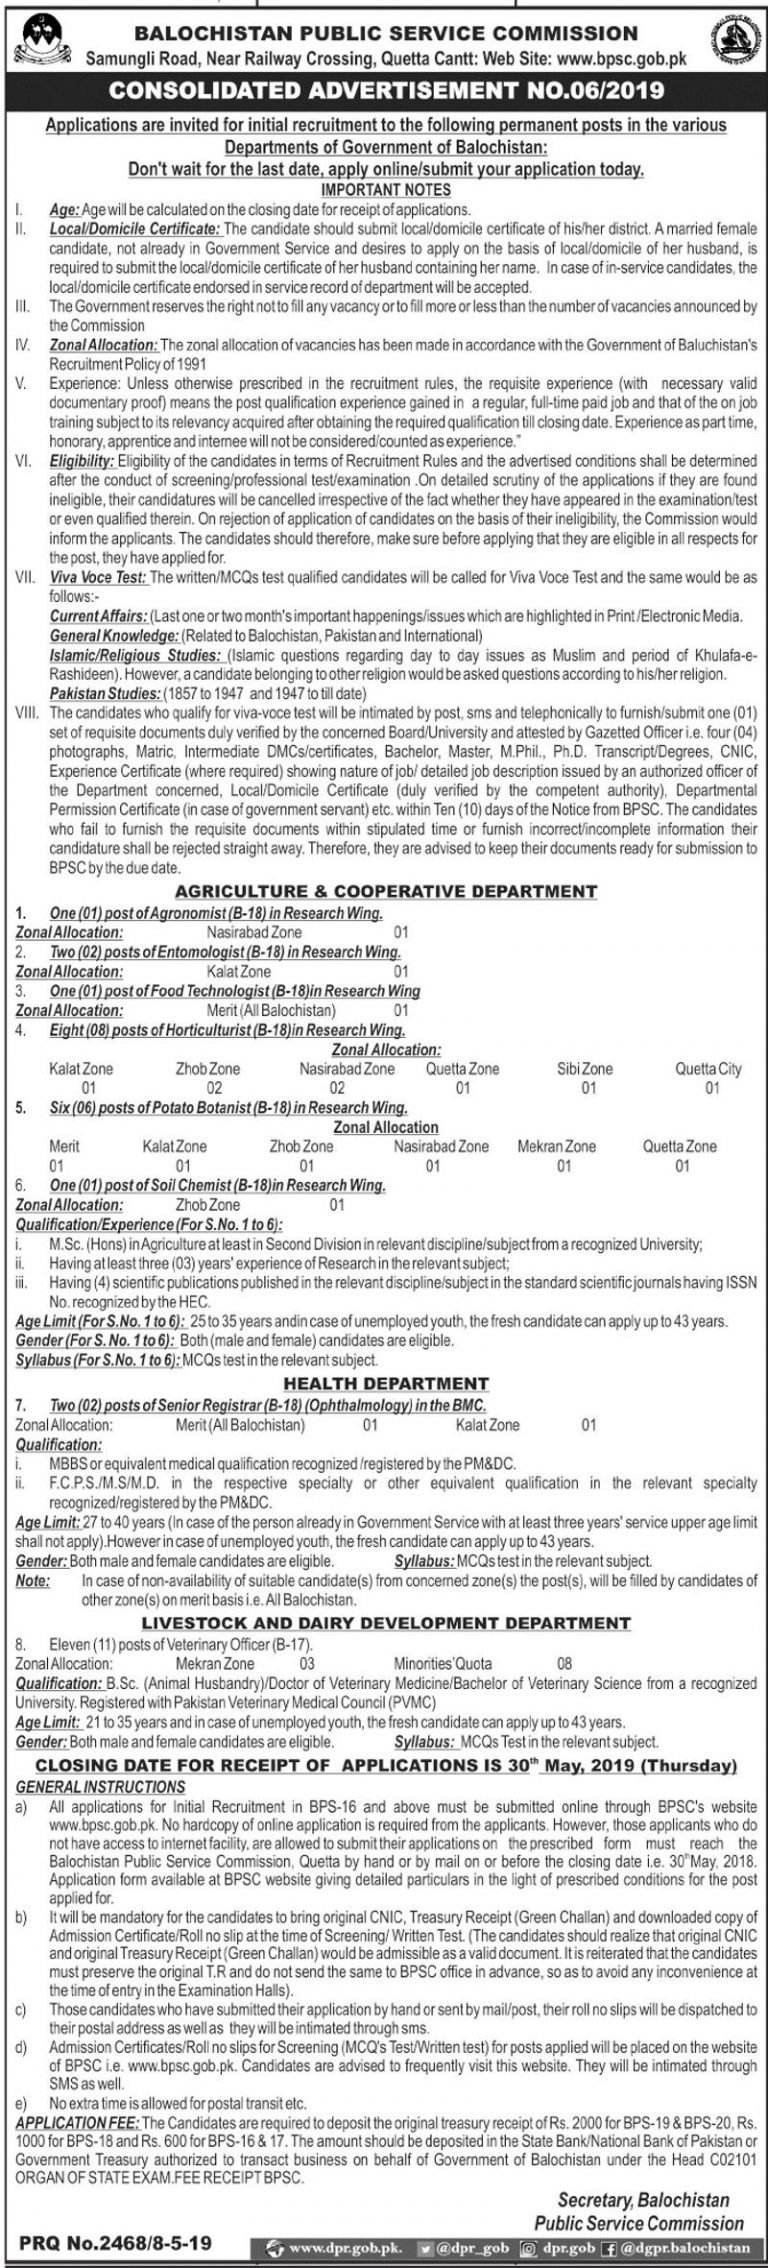 BPSC Jobs 6/2019: 32+ Agriculture, Horticulturists, Veterinary Officers & Other Posts in Balochistan Government